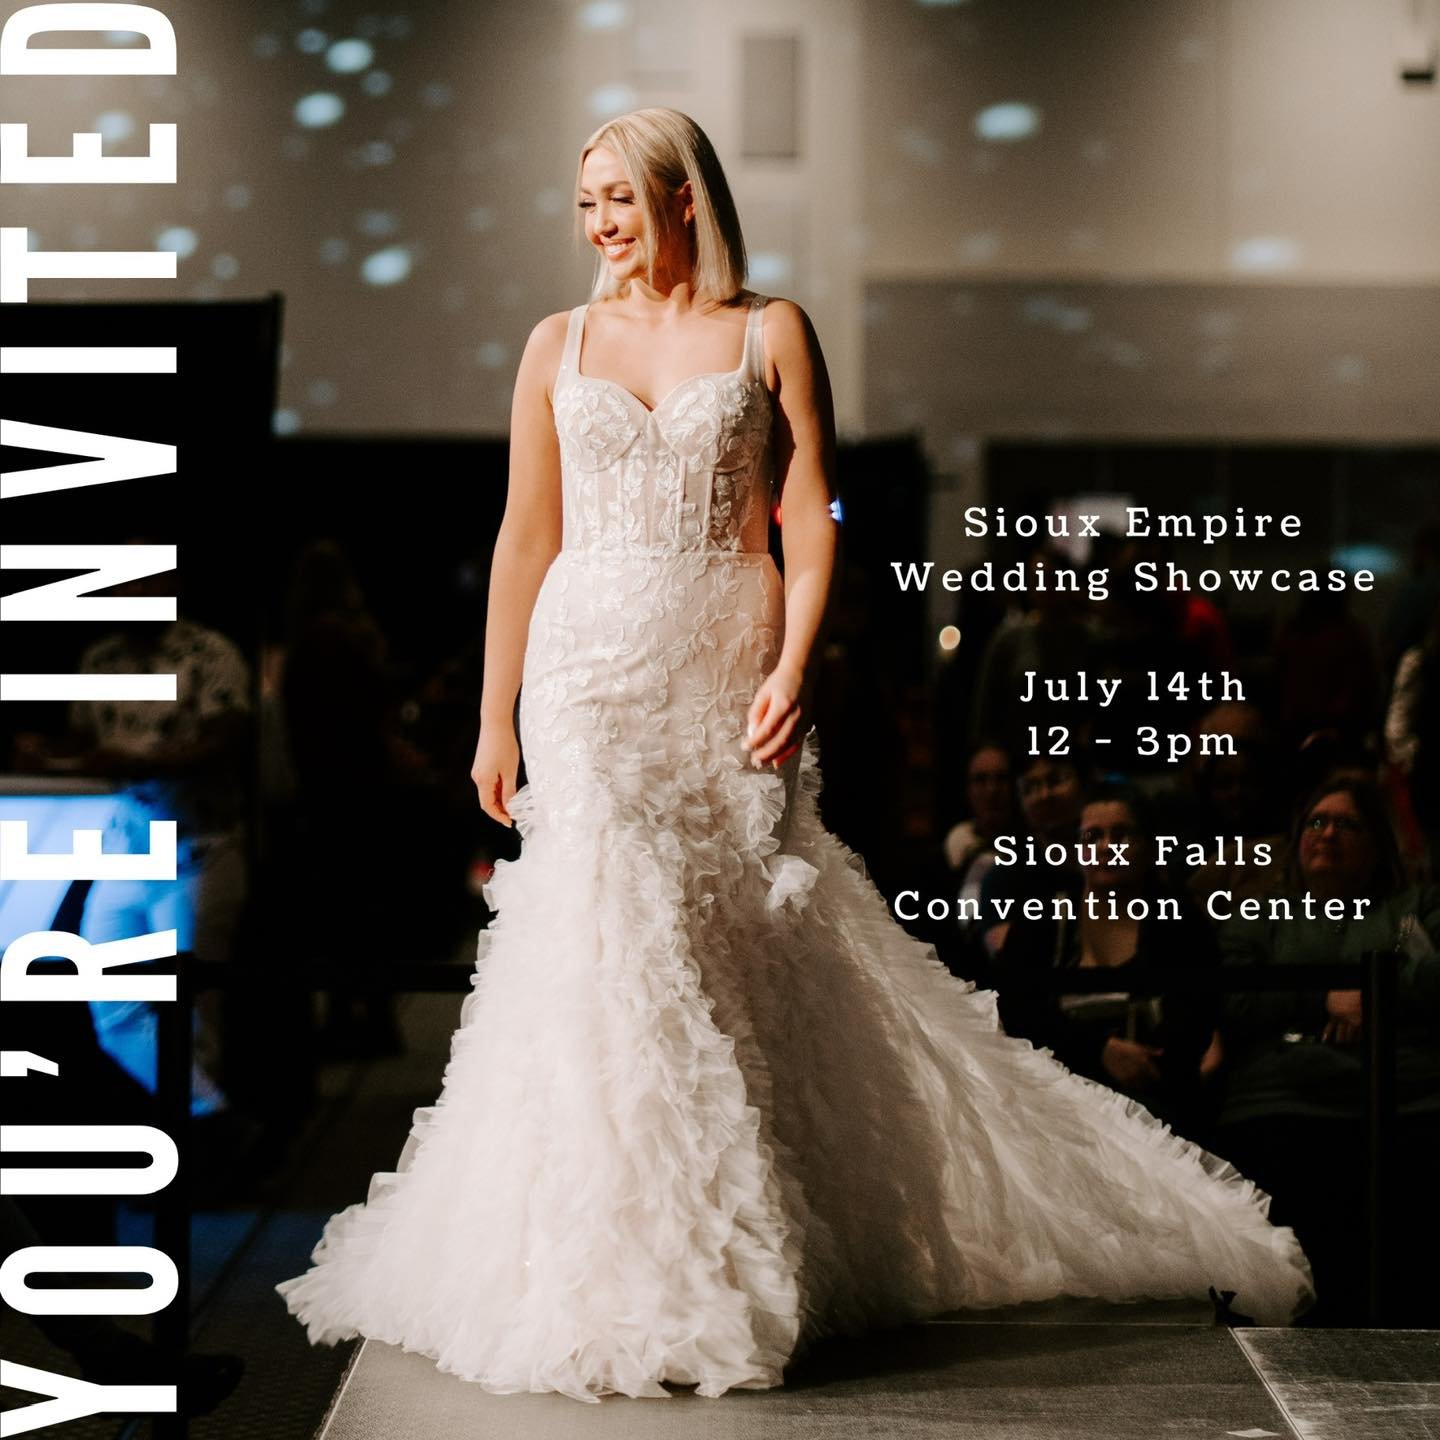 Brides 👰&hellip; Come visit with over 100+ booths to discuss your wedding at the LARGEST and MOST ATTENDED #1 Sioux Falls bridal show at the Sioux Empire Wedding Showcase on July 14th from 12-3pm at the Sioux Falls Convention Center! Grab your VIP B